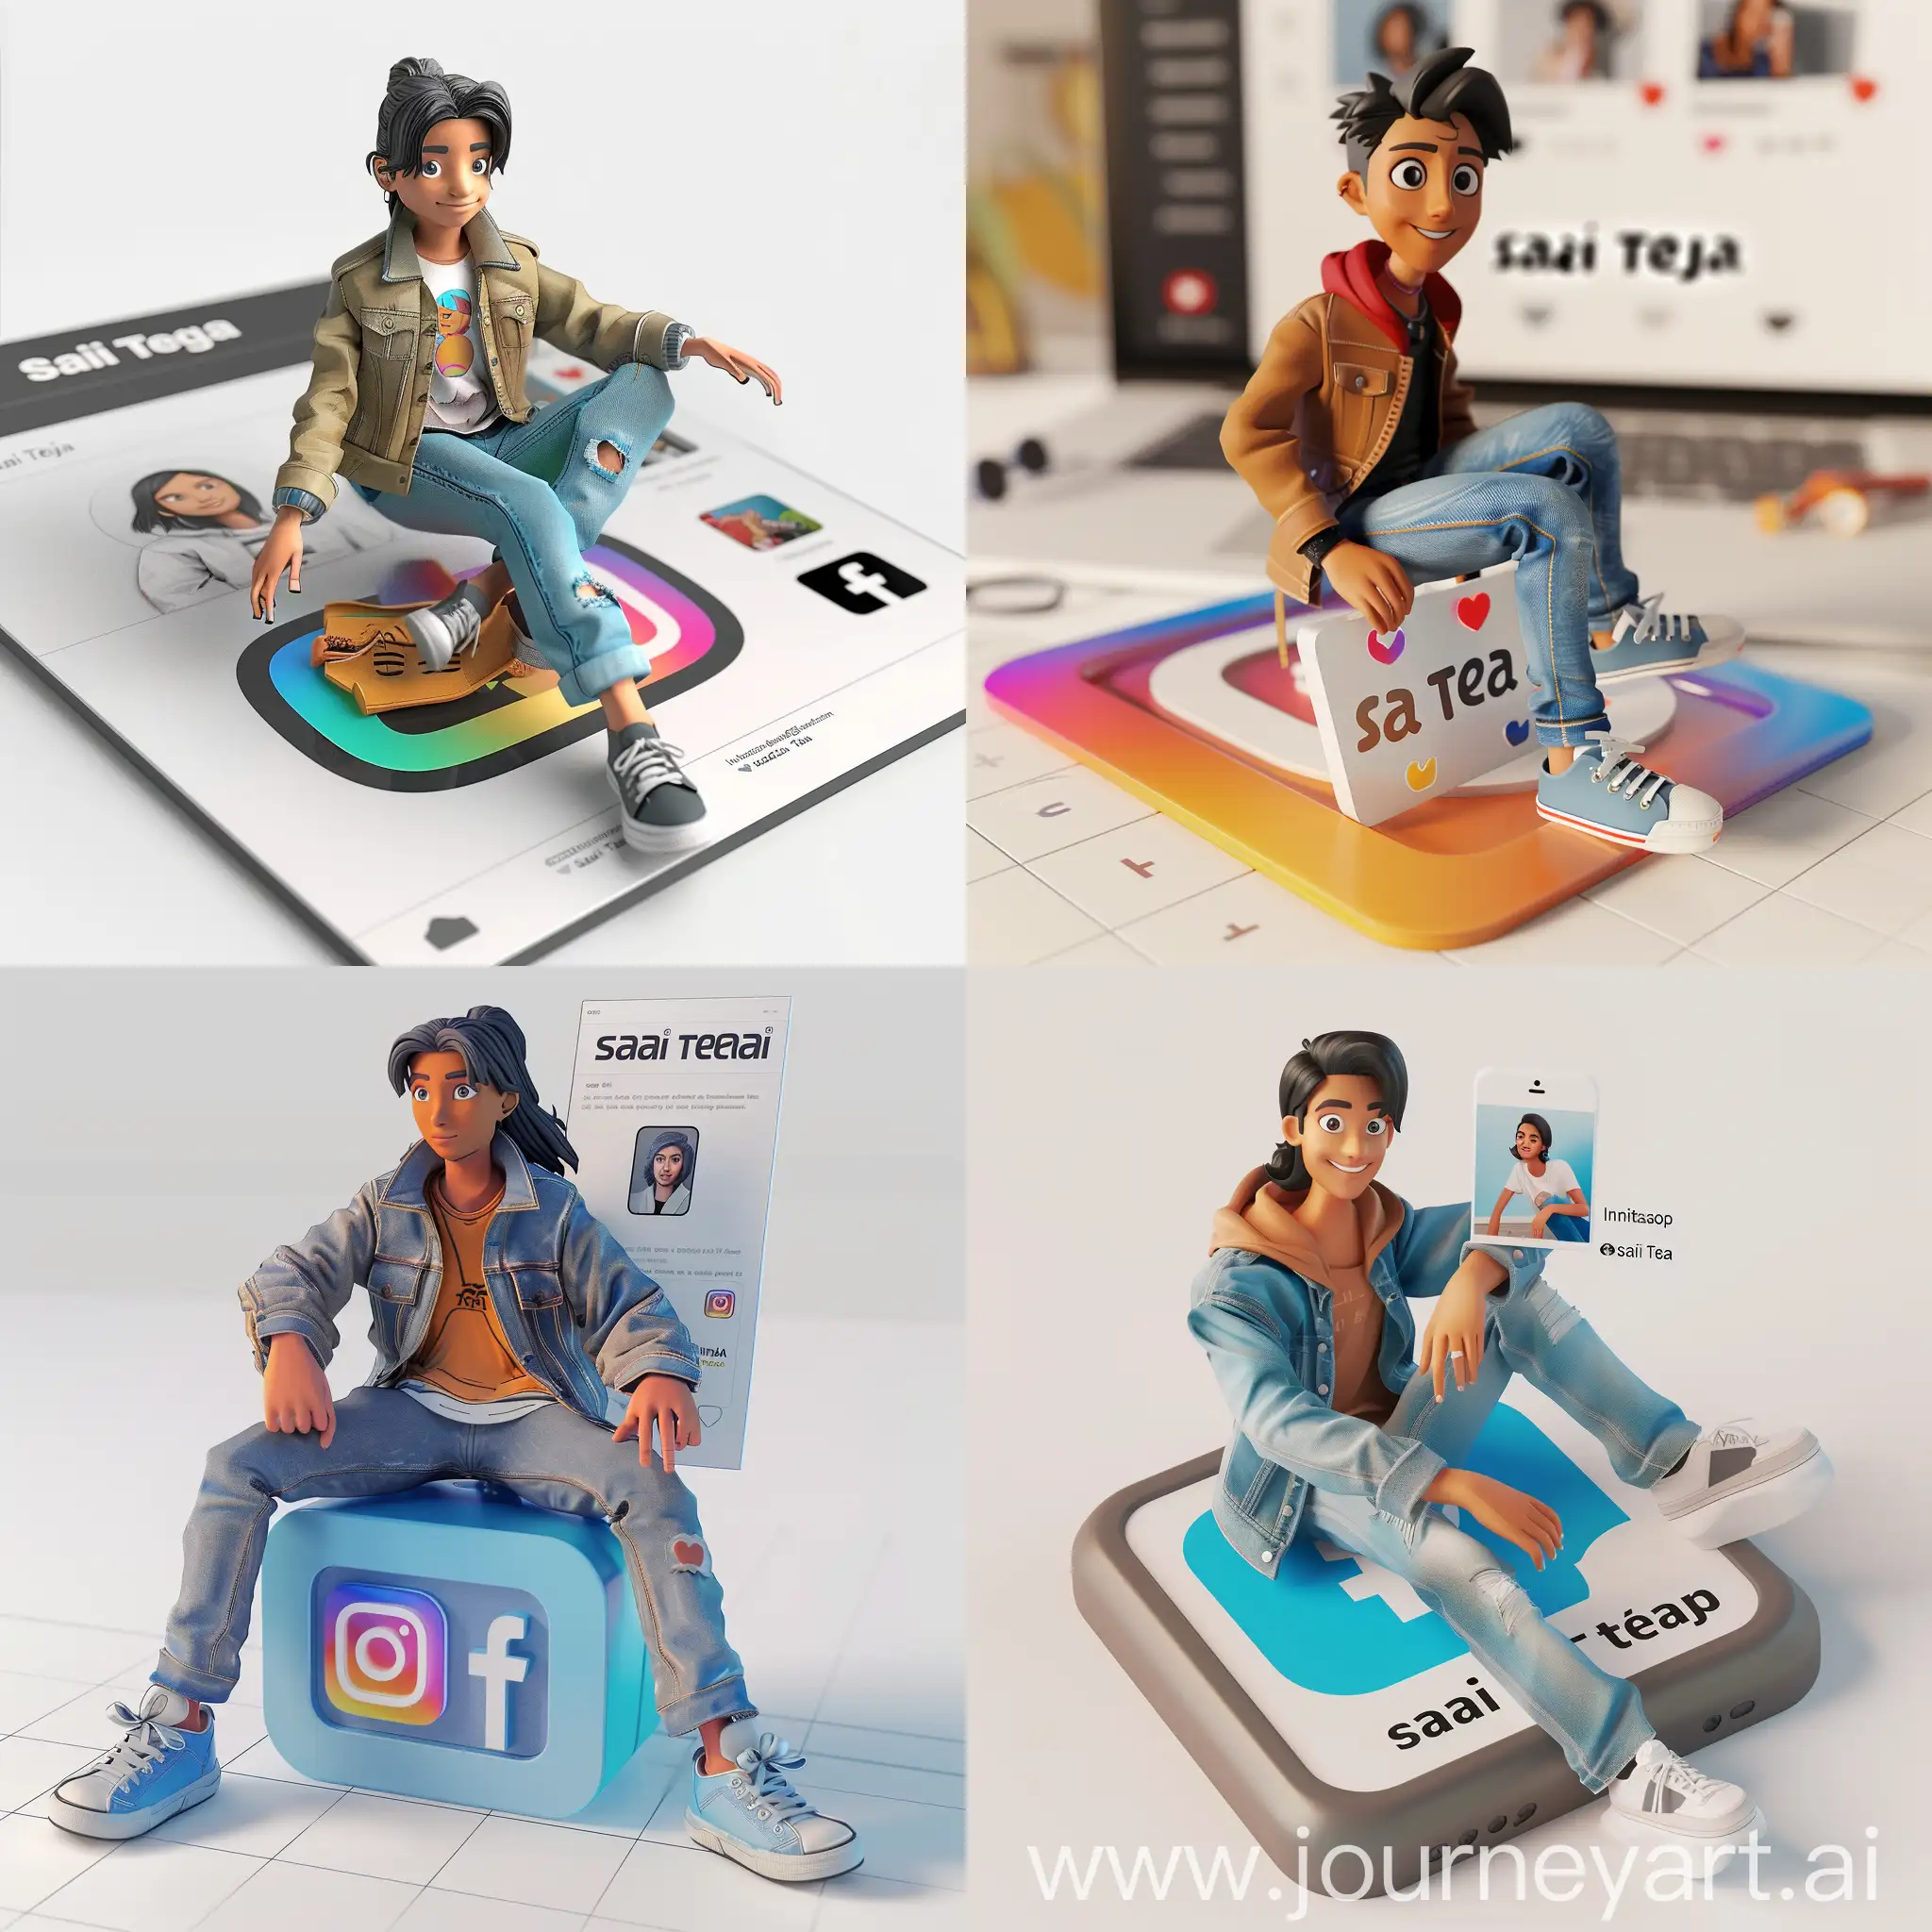 Create a 3D illustration of an animated character sitting casually on top of a social media logo "Instagram". The character must wear casual modern clothing such as jeans jacket and sneakers shoes. The background of the image is a social media profile page with a user name "sai teja" and a profile picture that match.